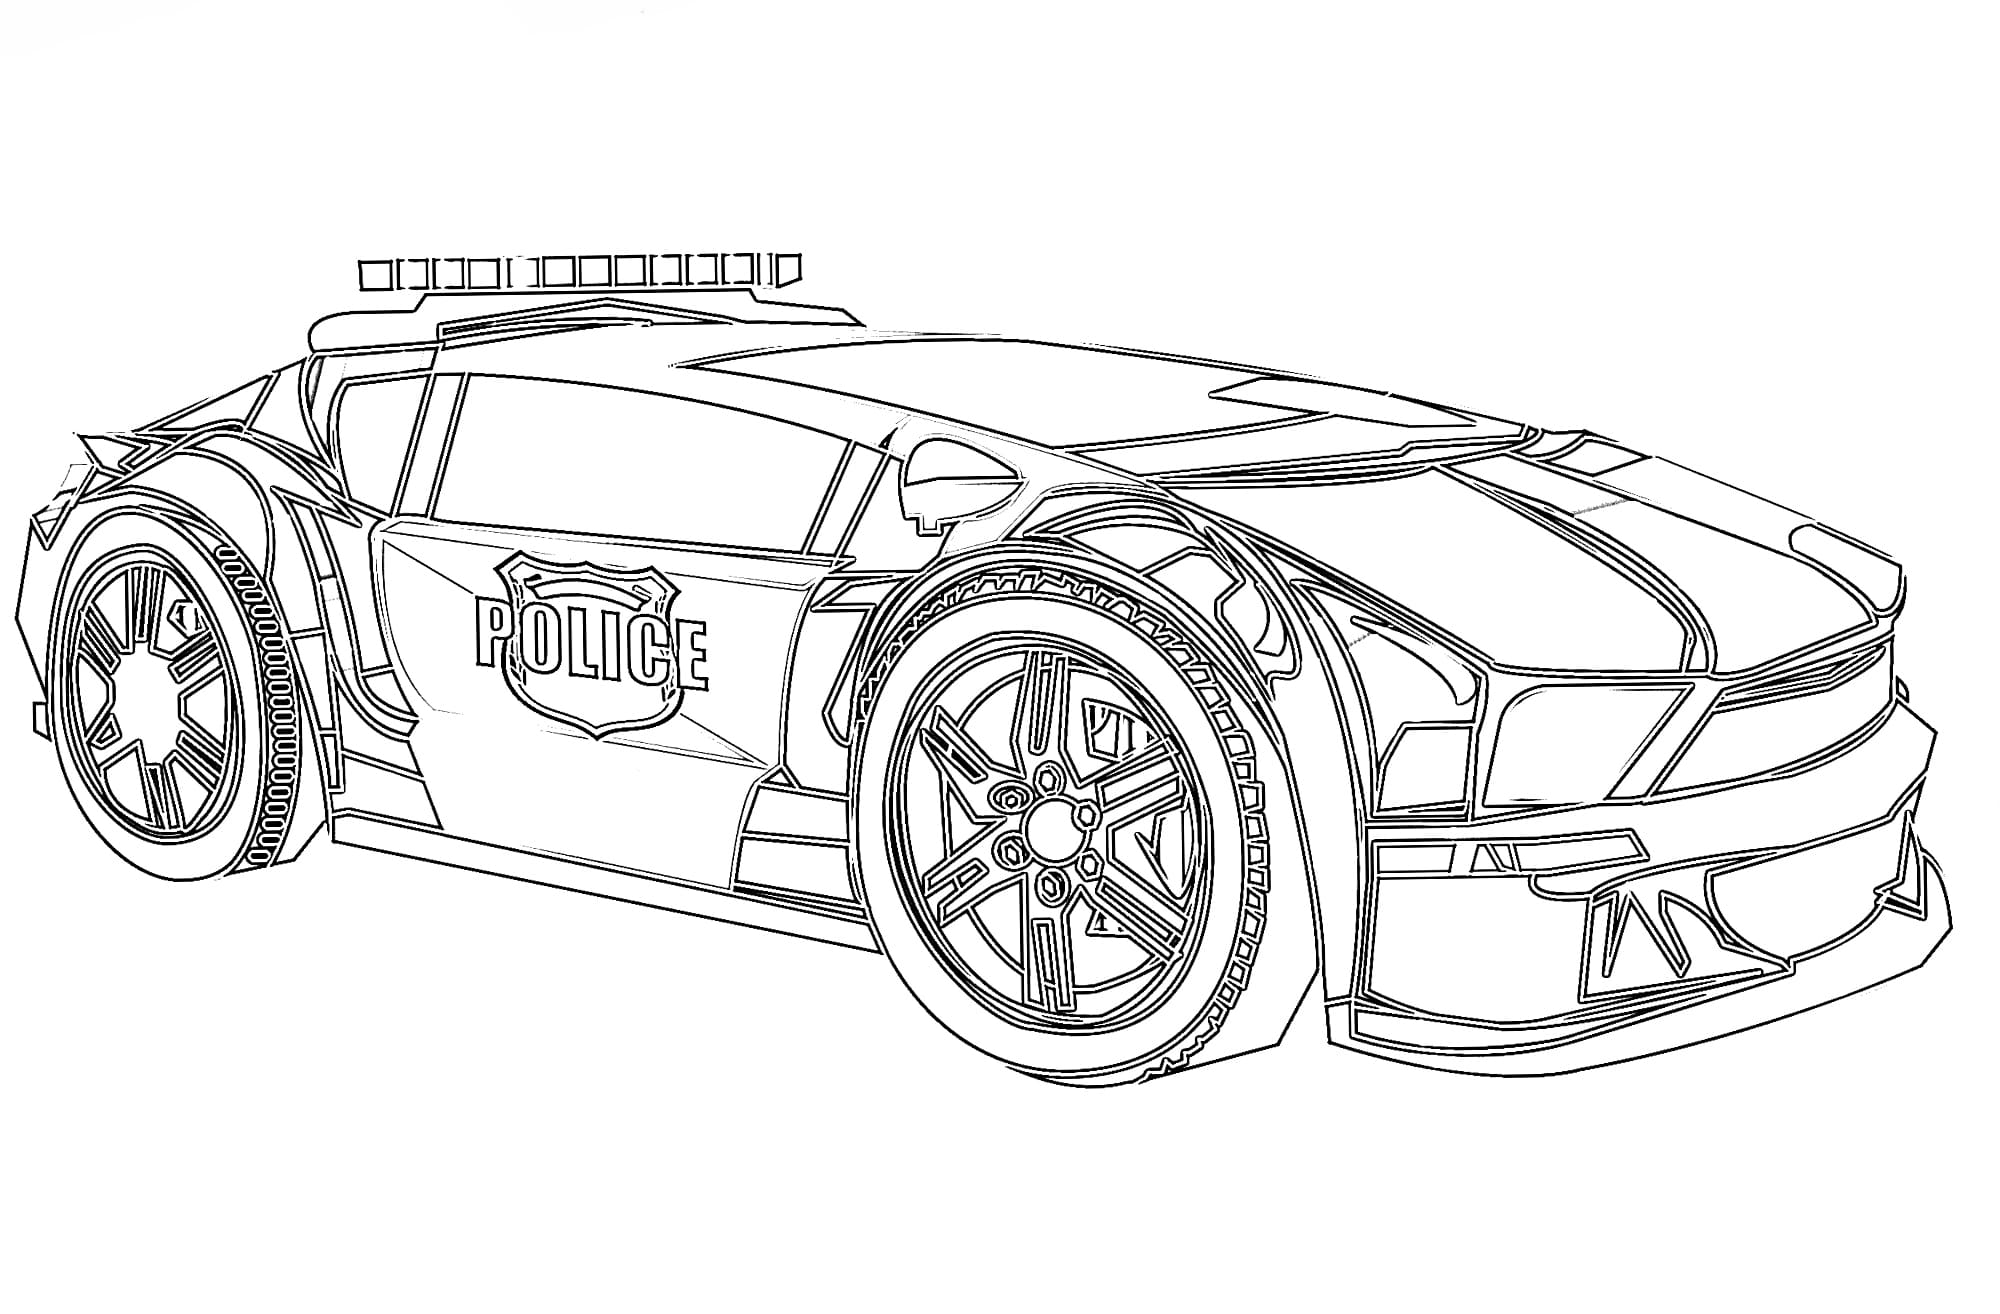 Police Car Coloring Pages   Printable Coloring Pages